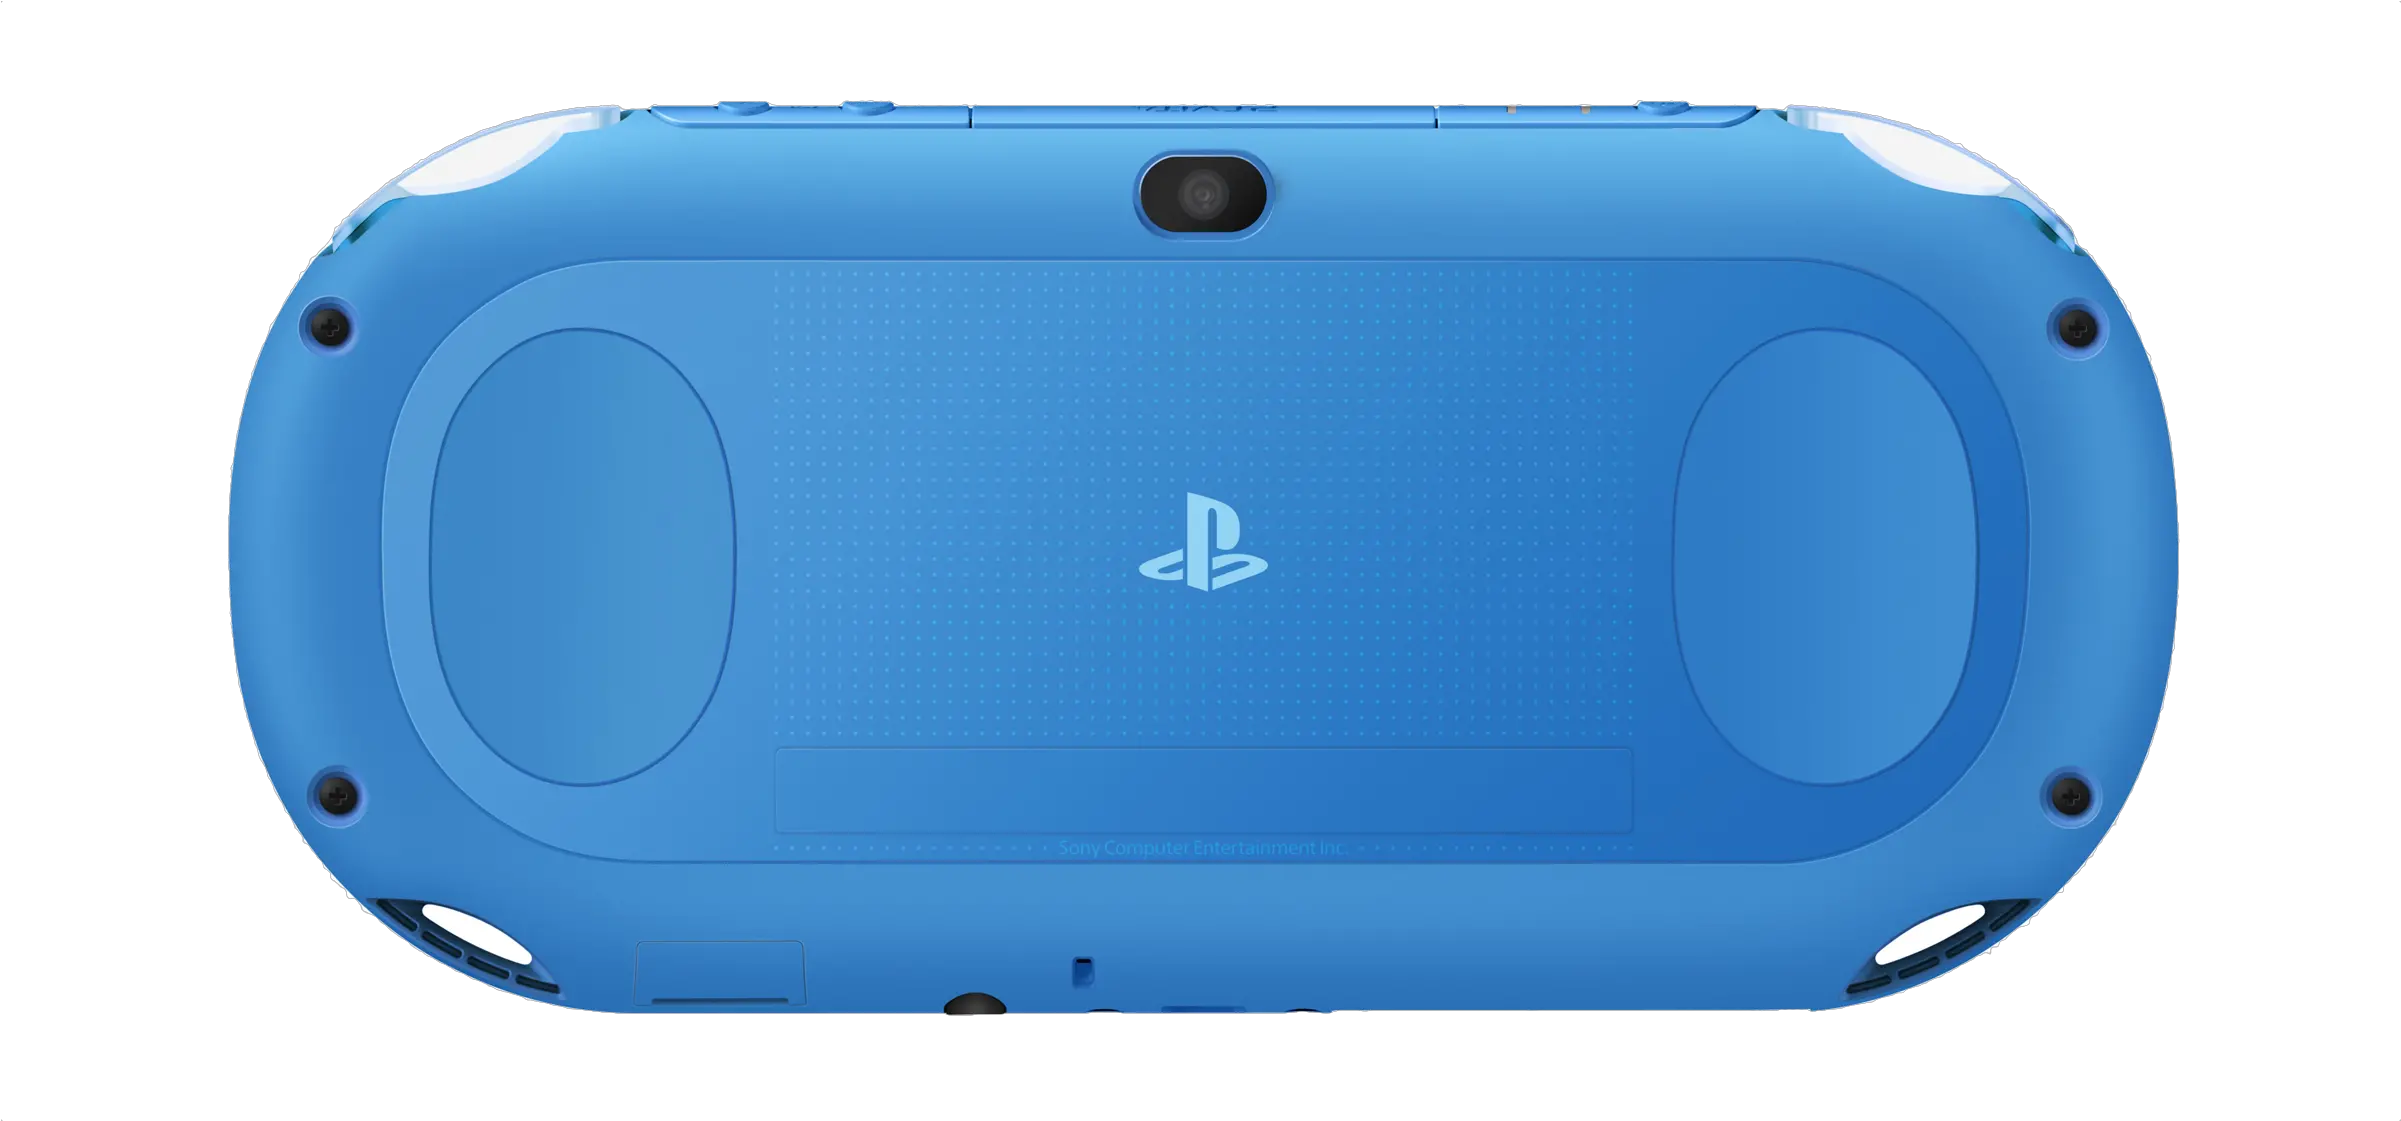 Playstation Vita May Die Childless But It Changed Sony In Ps Vita Azul Png Ps Vita Icon Stands